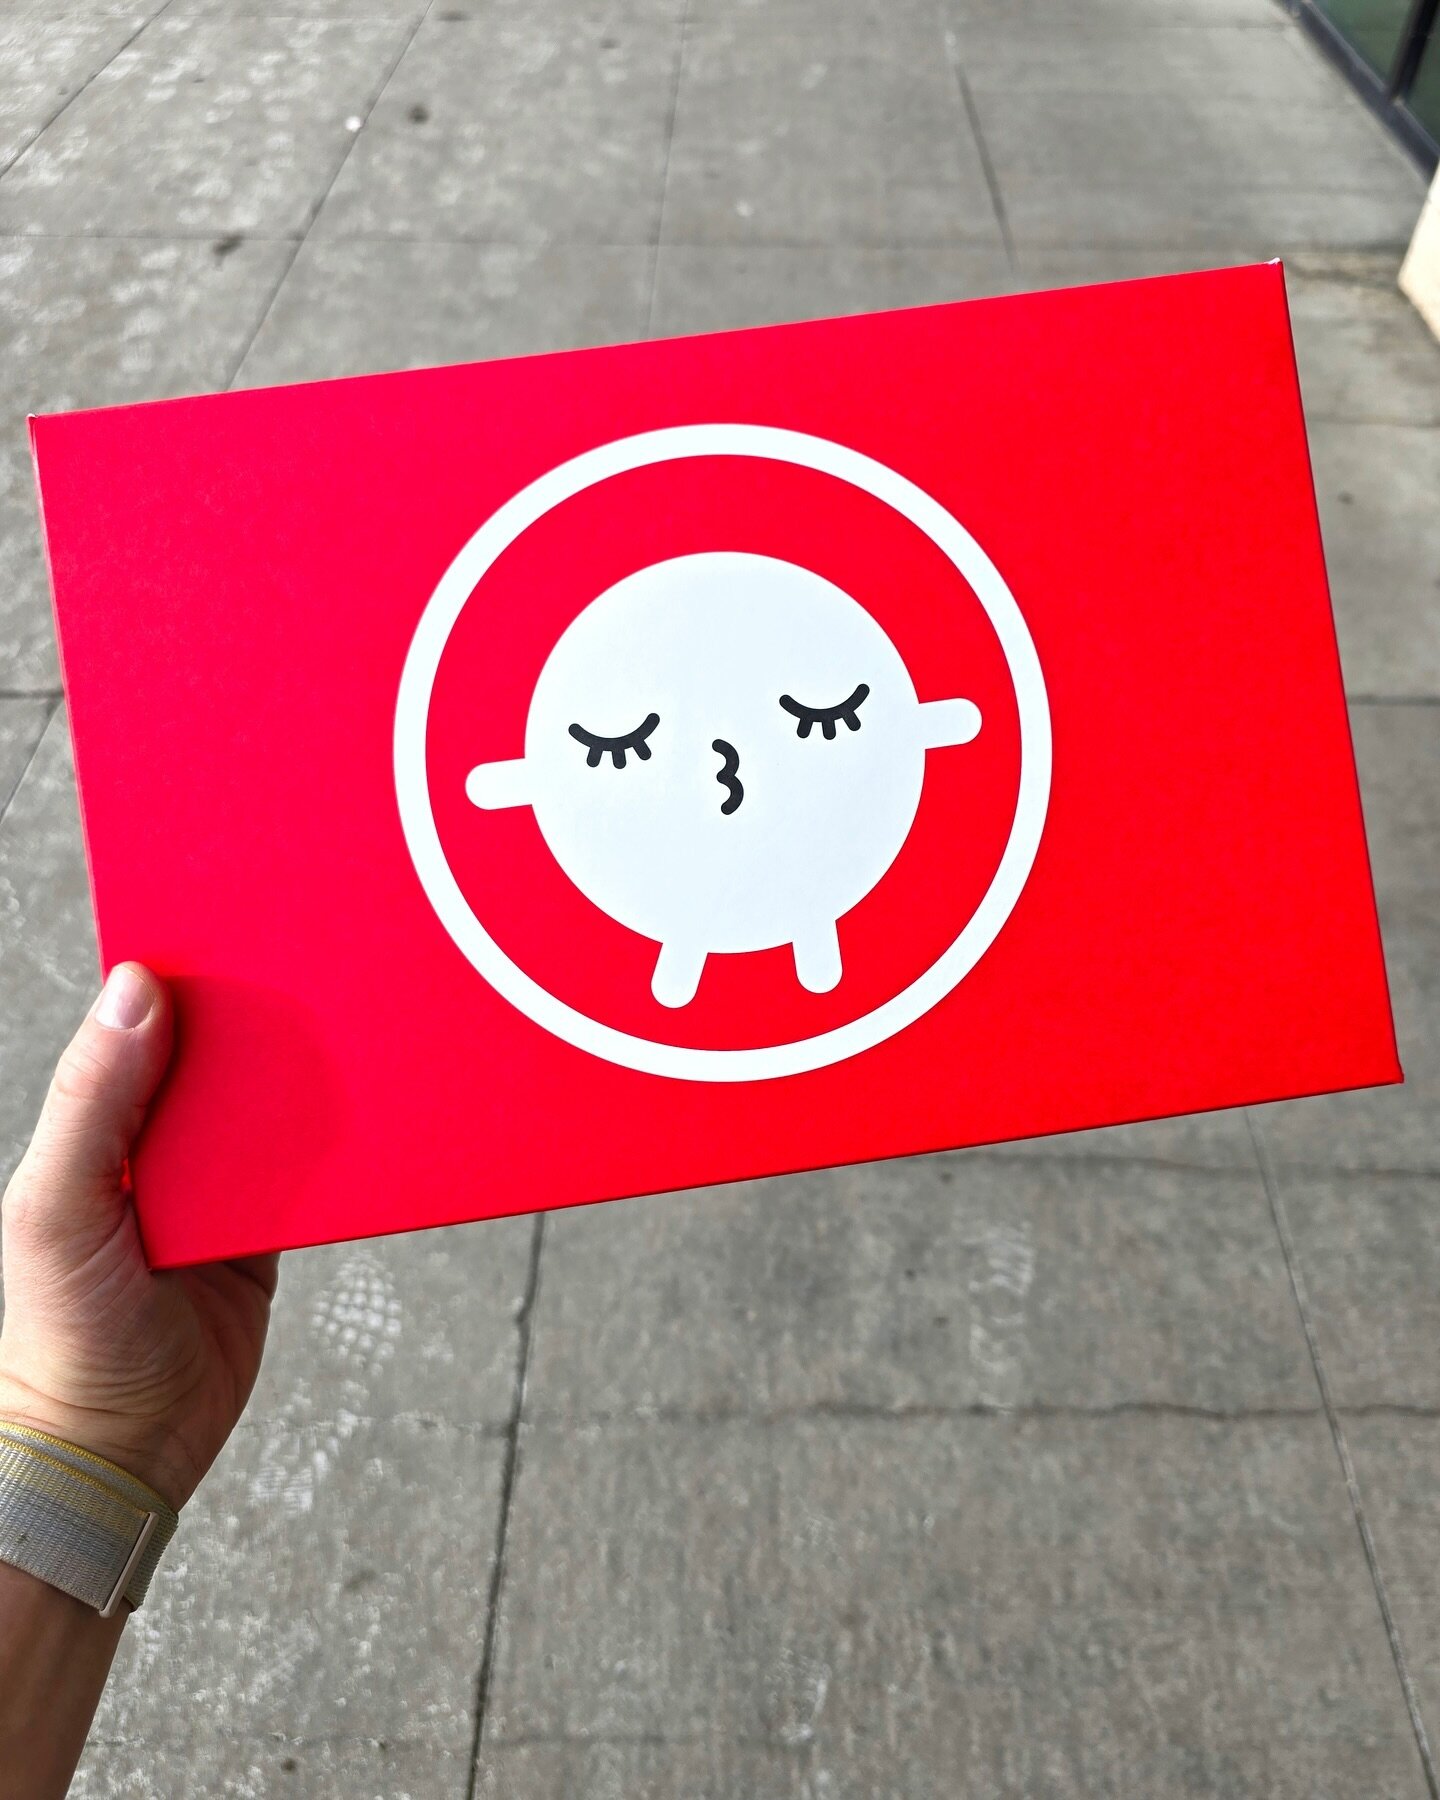 They&rsquo;re back! 😘

Our signature red boxes have returned for Valentine&rsquo;s Day! 💝

Pop in a pre-order for tomorrow, or just walk in to one of our 3️⃣ locations to say hi 👋!